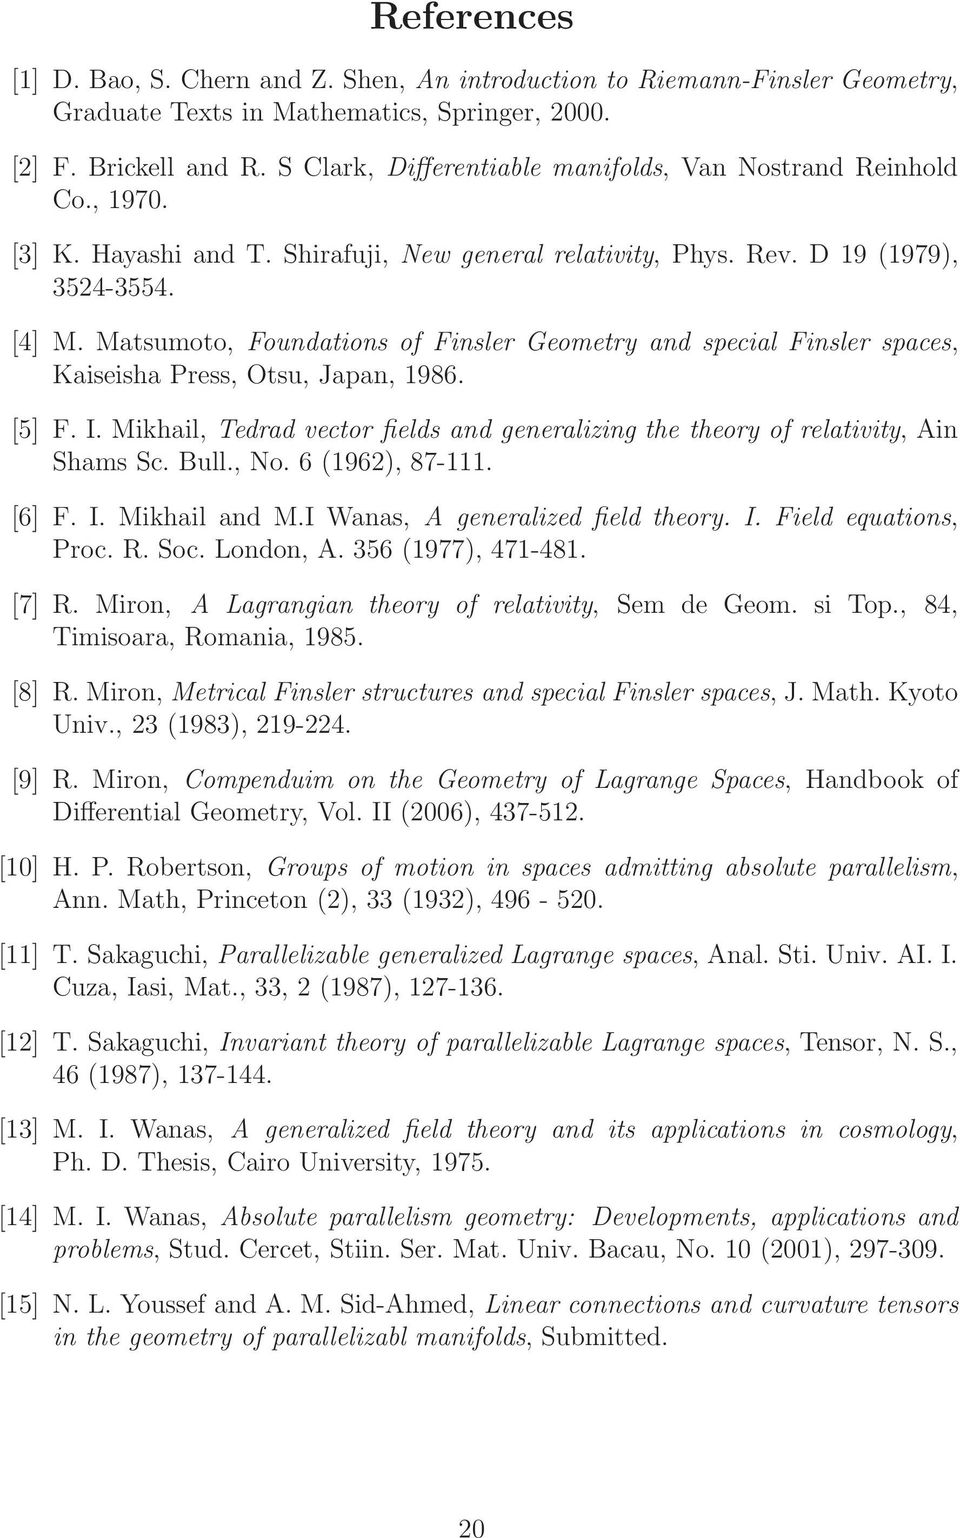 Matsumt, Fundatns f Fnsler Gemetry and specal Fnsler spaces, Kasesha Press, Otsu, Japan, 1986. [5] F. I. Mkhal, Tedrad vectr felds and generalzng the thery f relatvty, An Shams Sc. Bull., N.